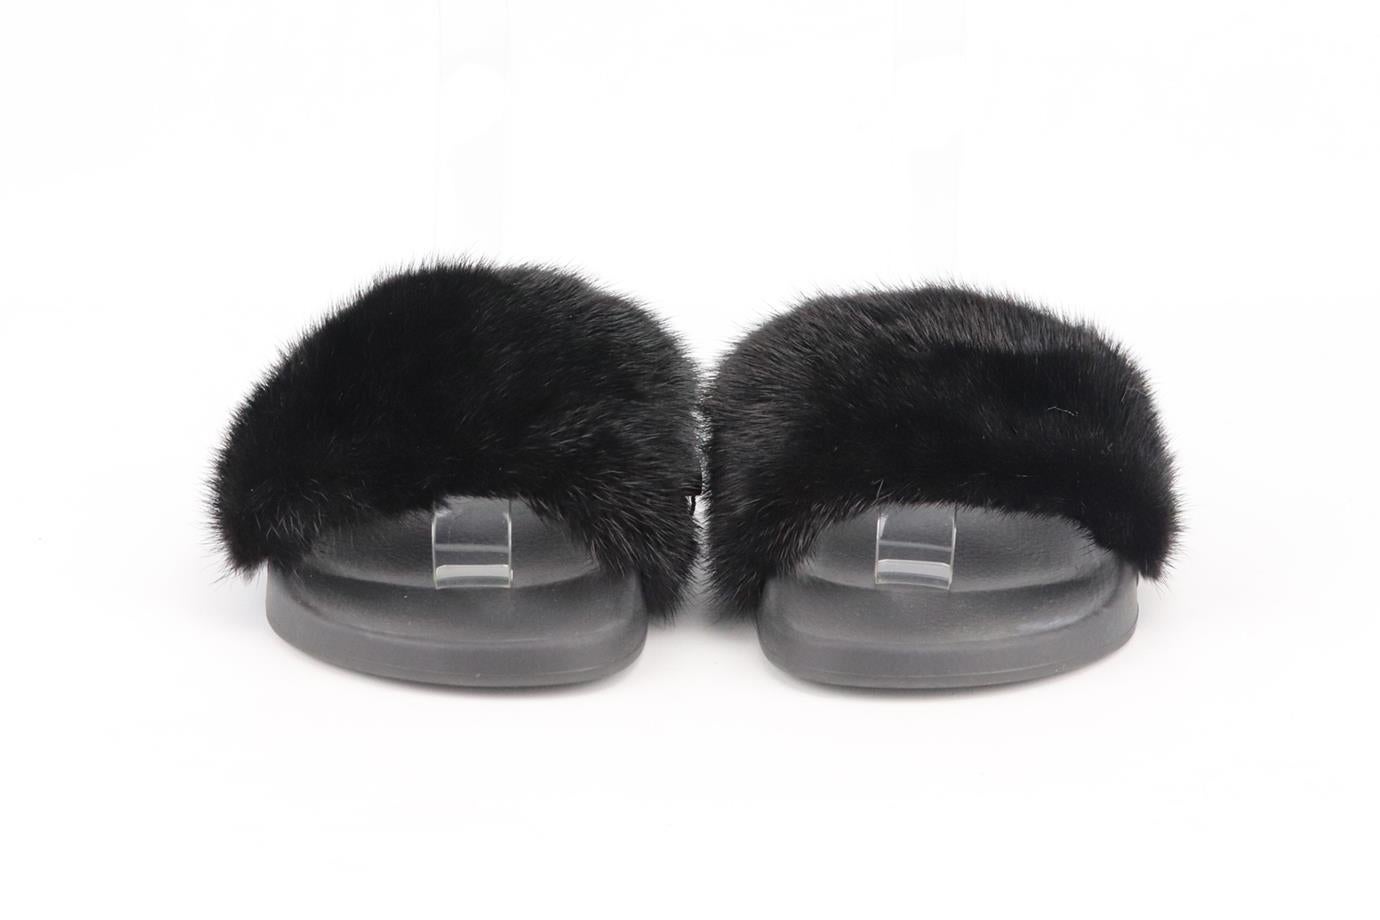 Givenchy fur and rubber slides. Made from black mink fur and rubber with comfortable molded footbeds. Black. Slips on. Does not come with box or dustbag. Size: EU 38 (UK 5, US 8). Insole: 9.6 in. Platform: 1 in
